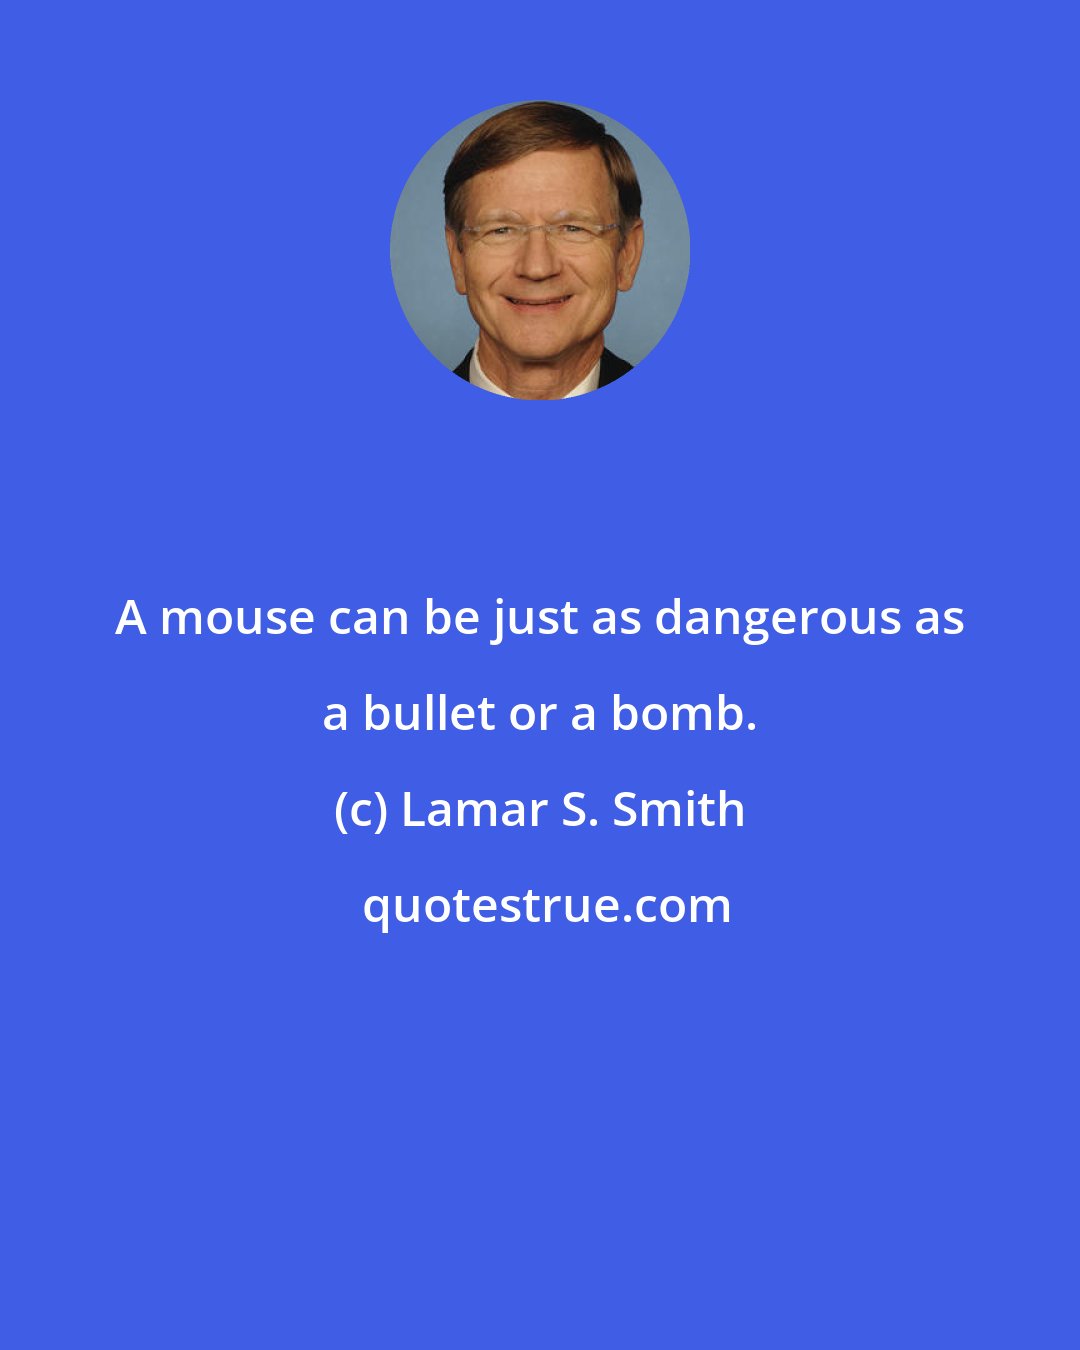 Lamar S. Smith: A mouse can be just as dangerous as a bullet or a bomb.